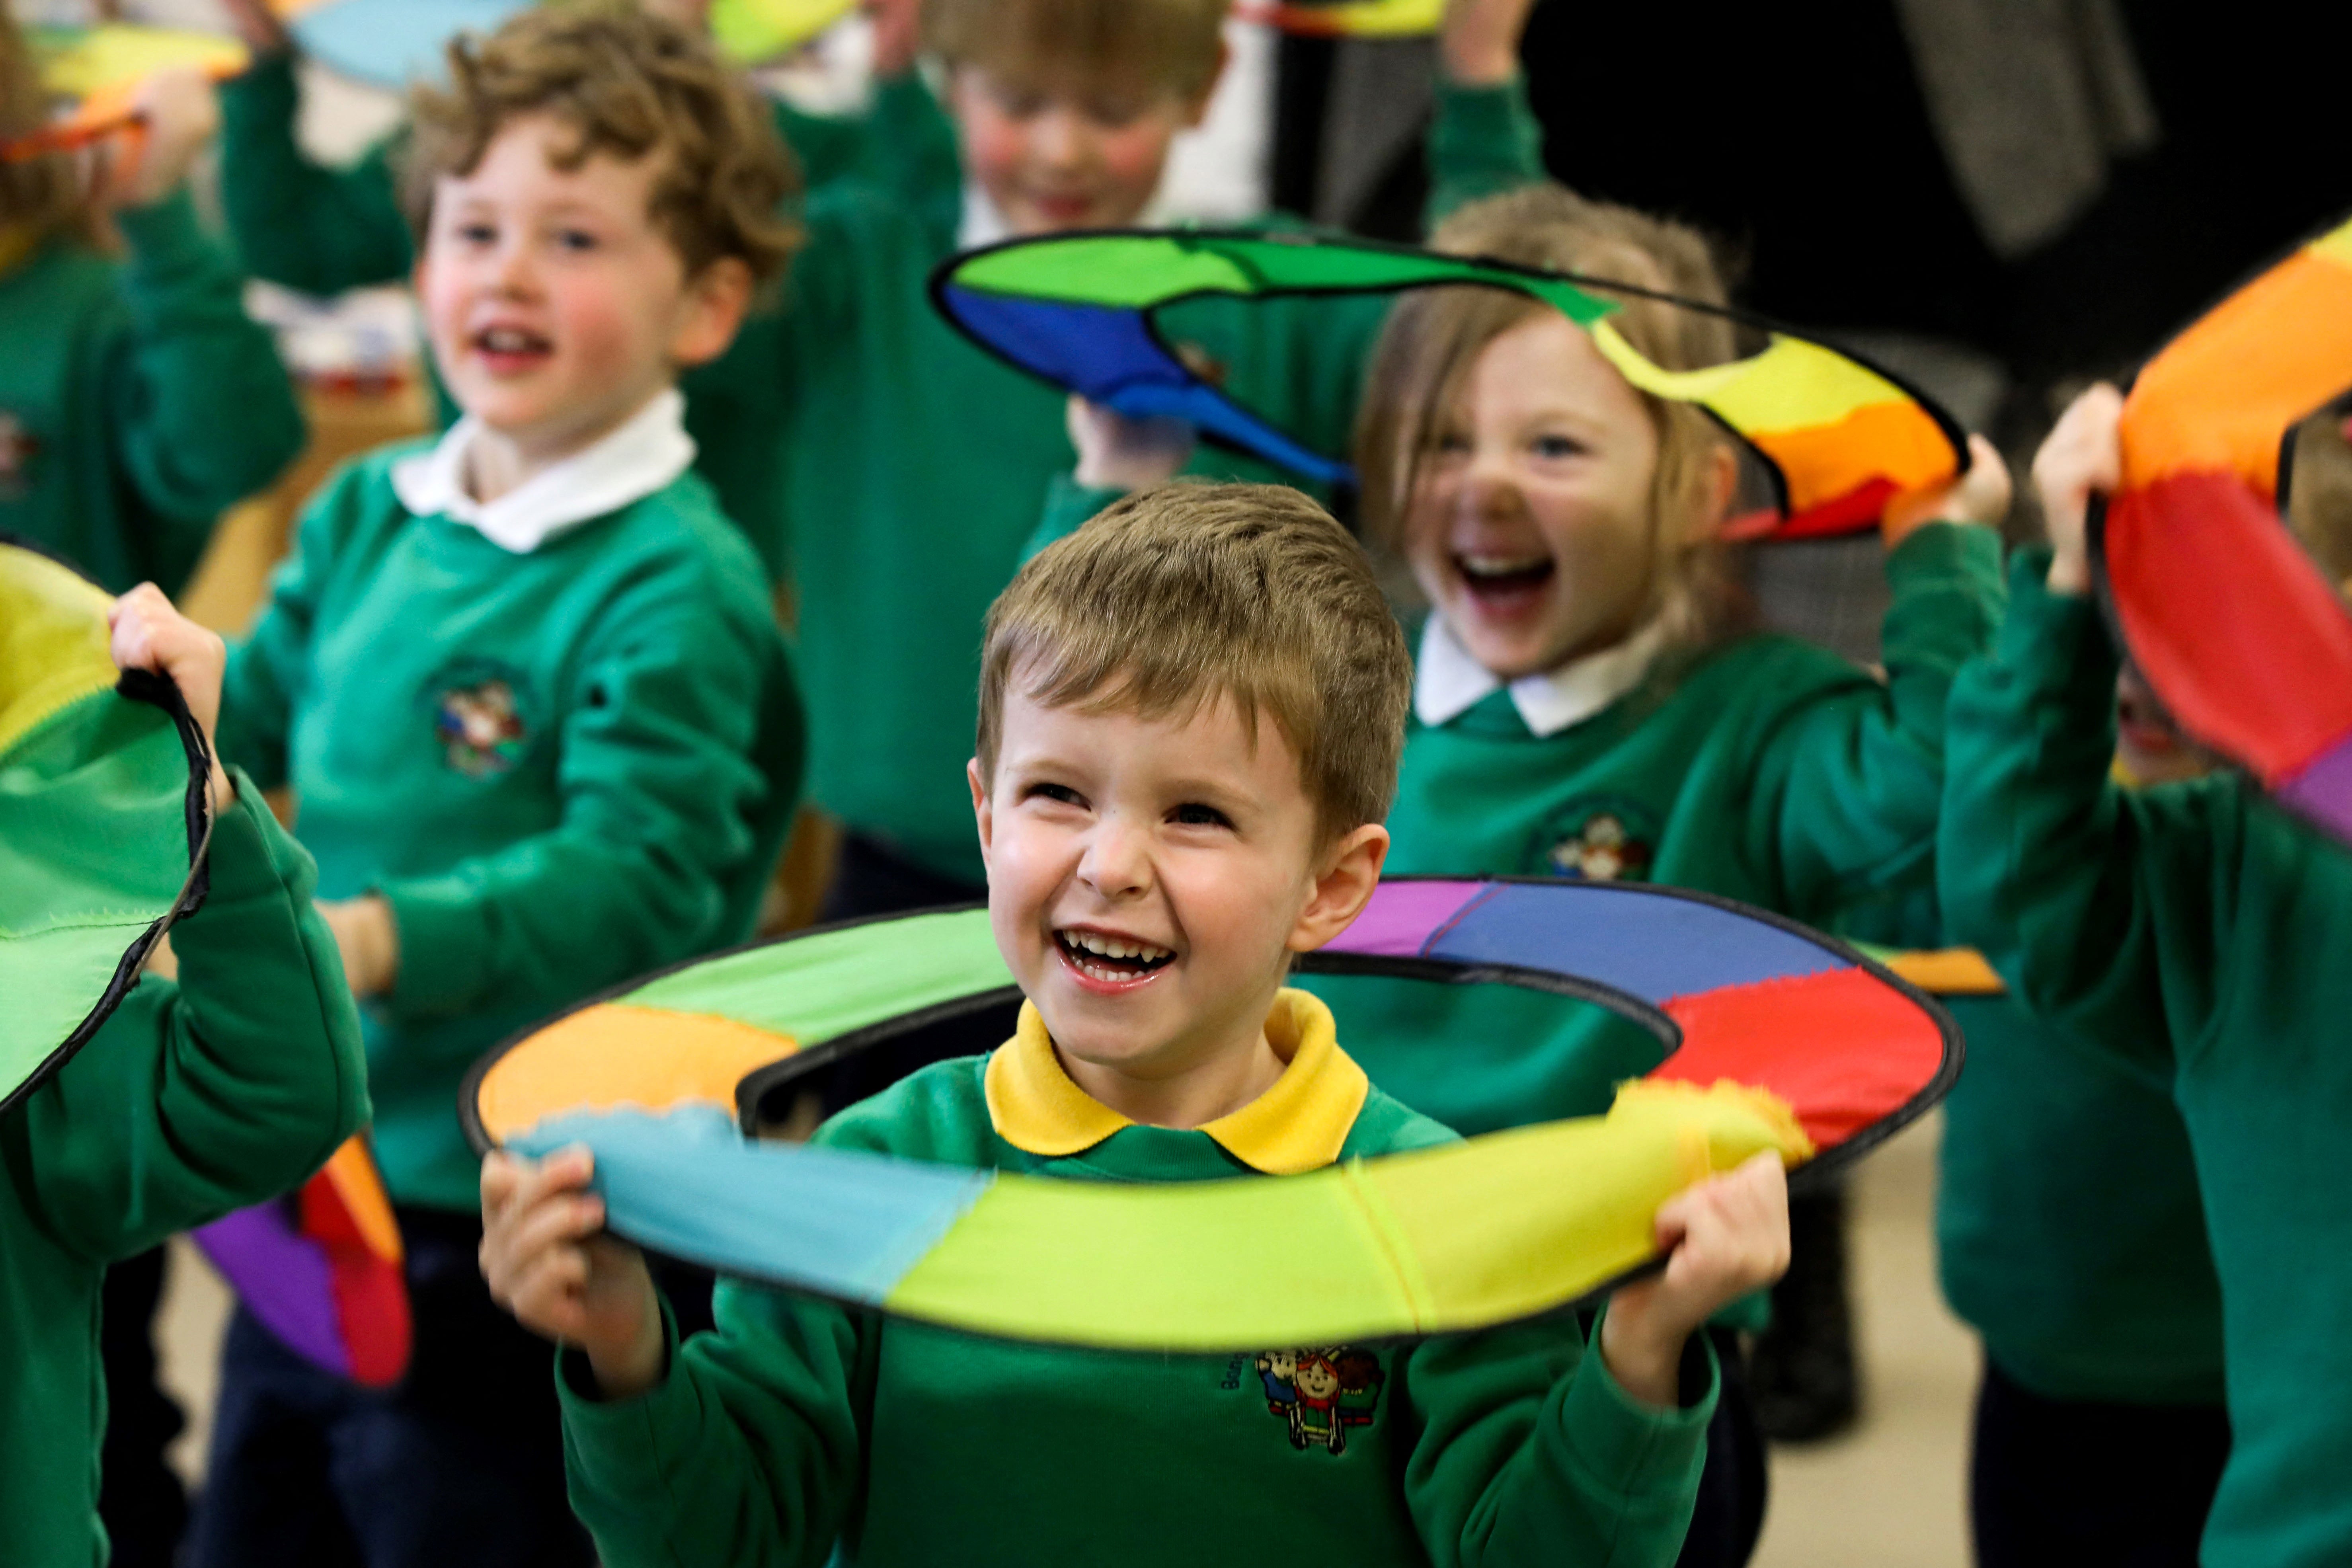 Pupils play on the first day of the newly opened Bangor Integrated Nursery school, one of the two outliers at kindergarten age, for children aged three and four, in Bangor, on 15 March 2023